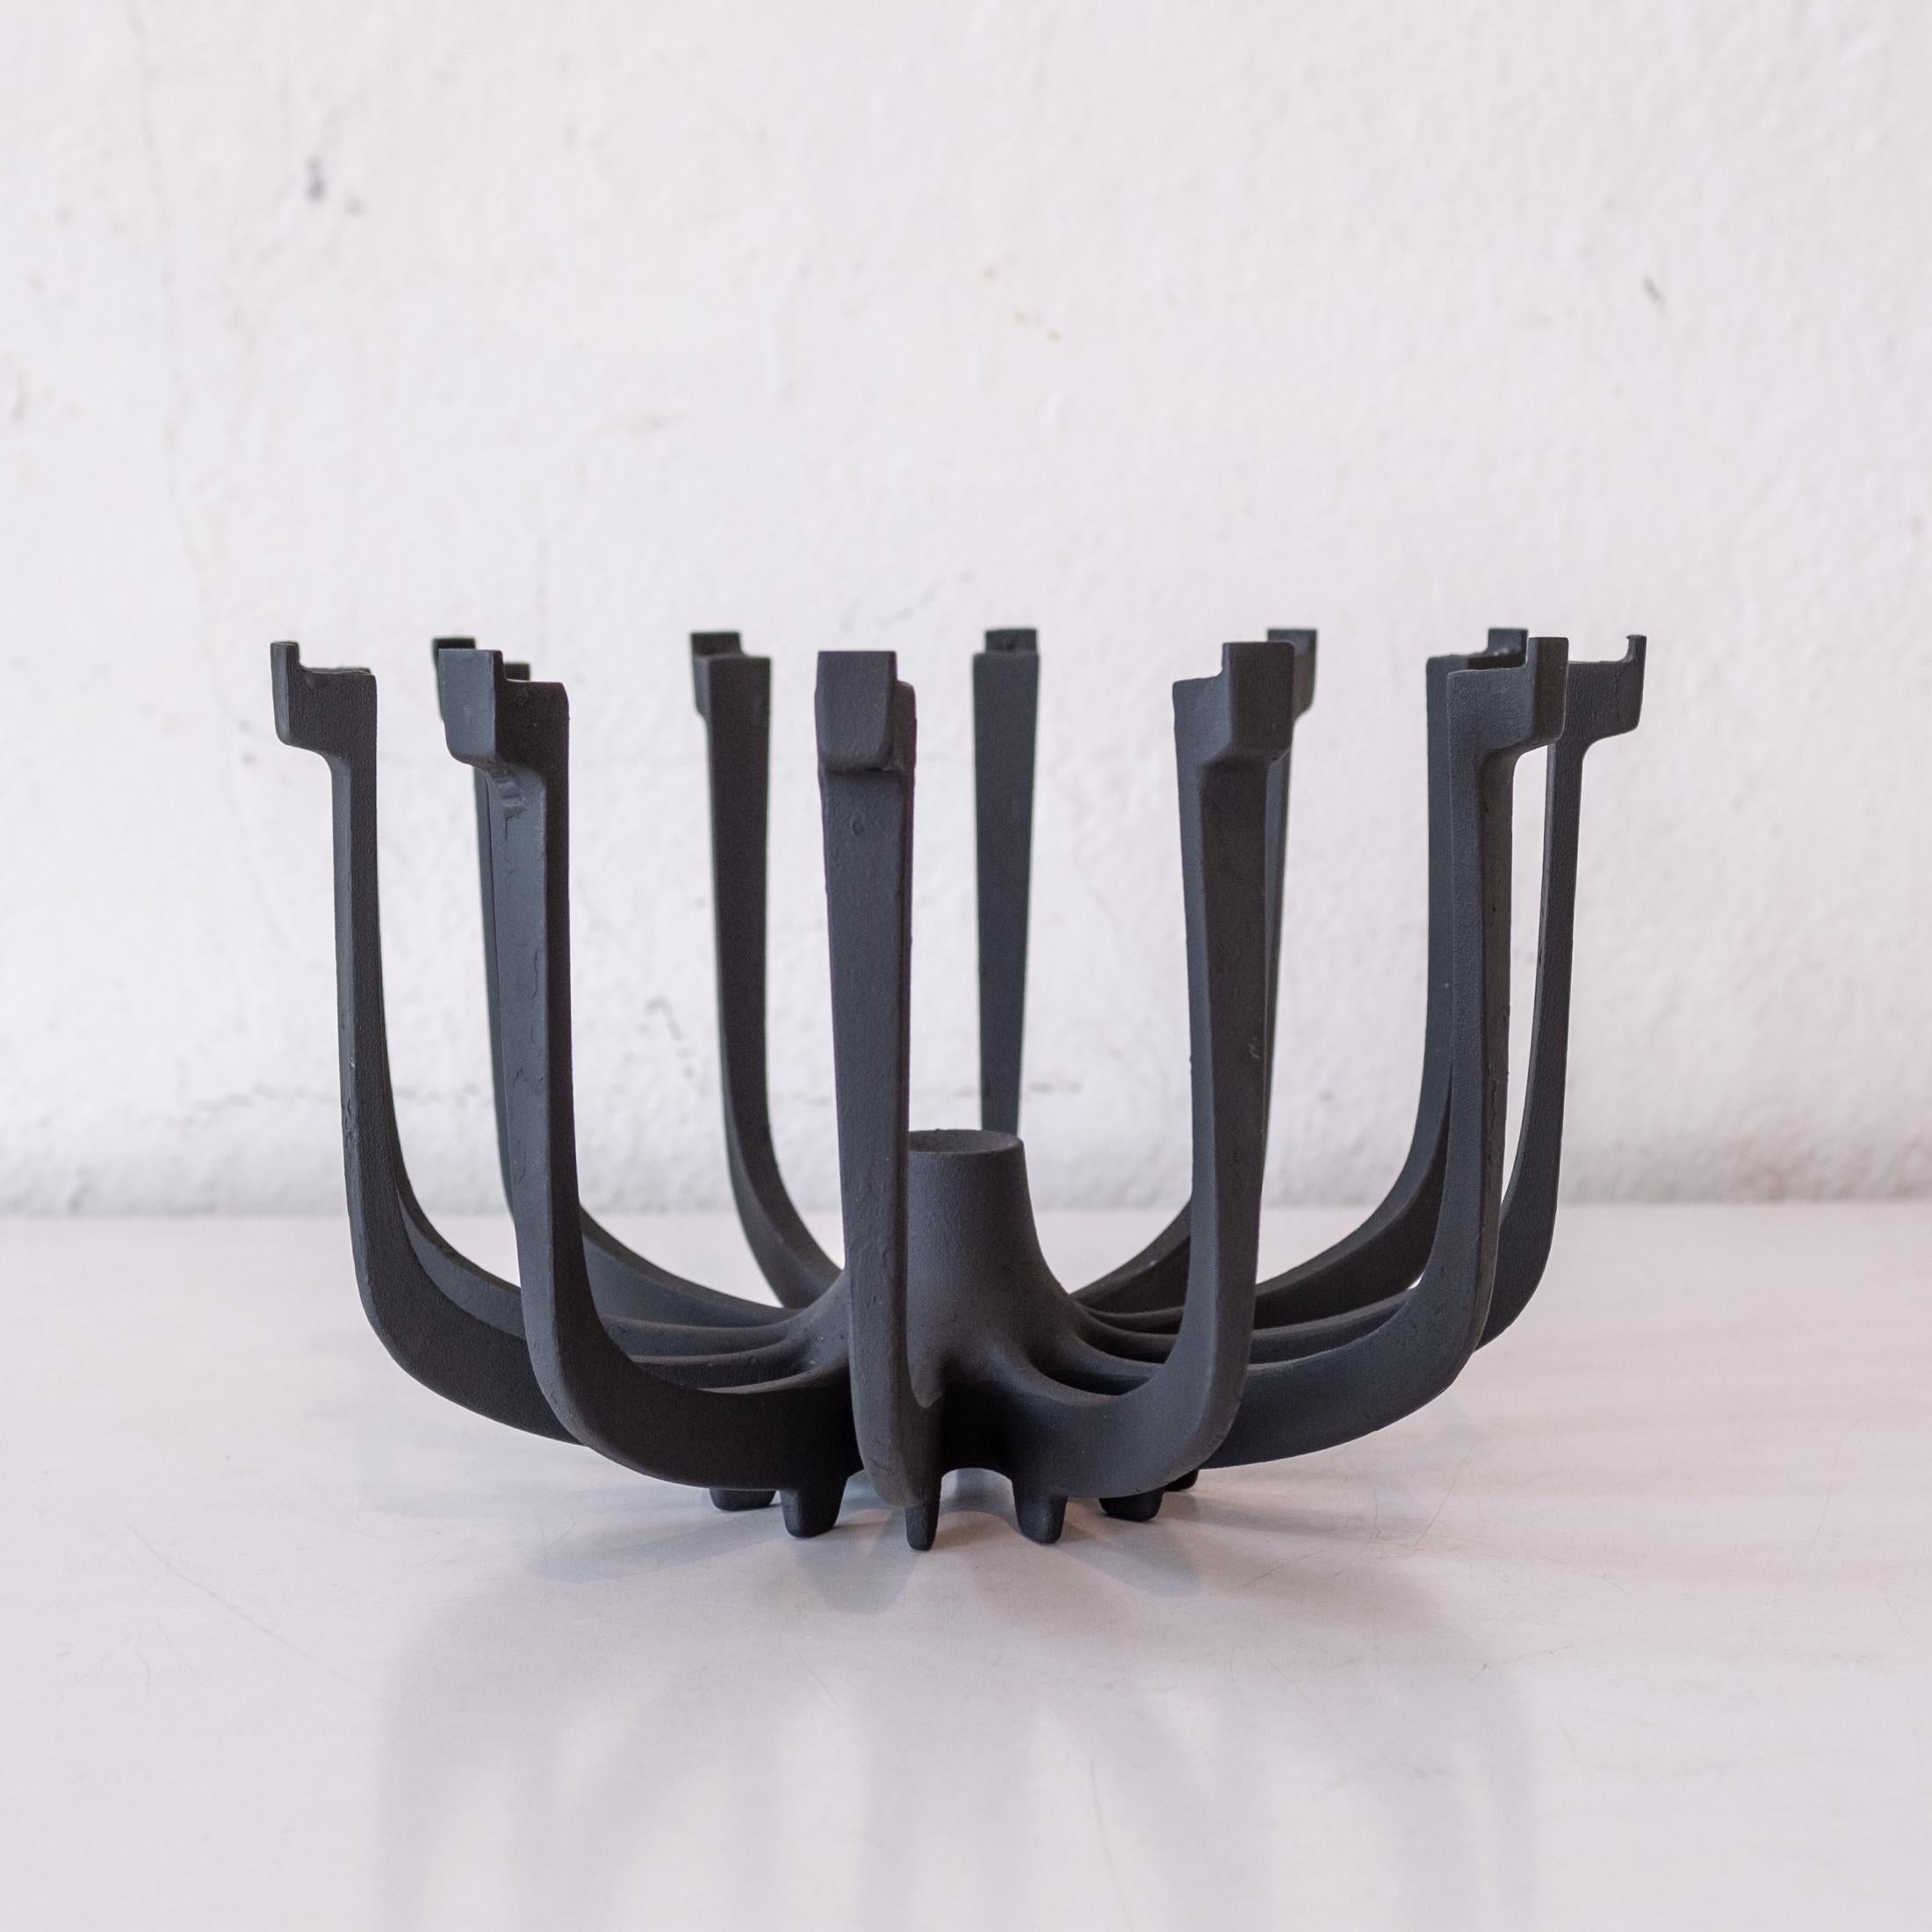 Gunnar Cyren Lysestager Iron Candle Holder and Candles by Dansk In Good Condition For Sale In San Diego, CA